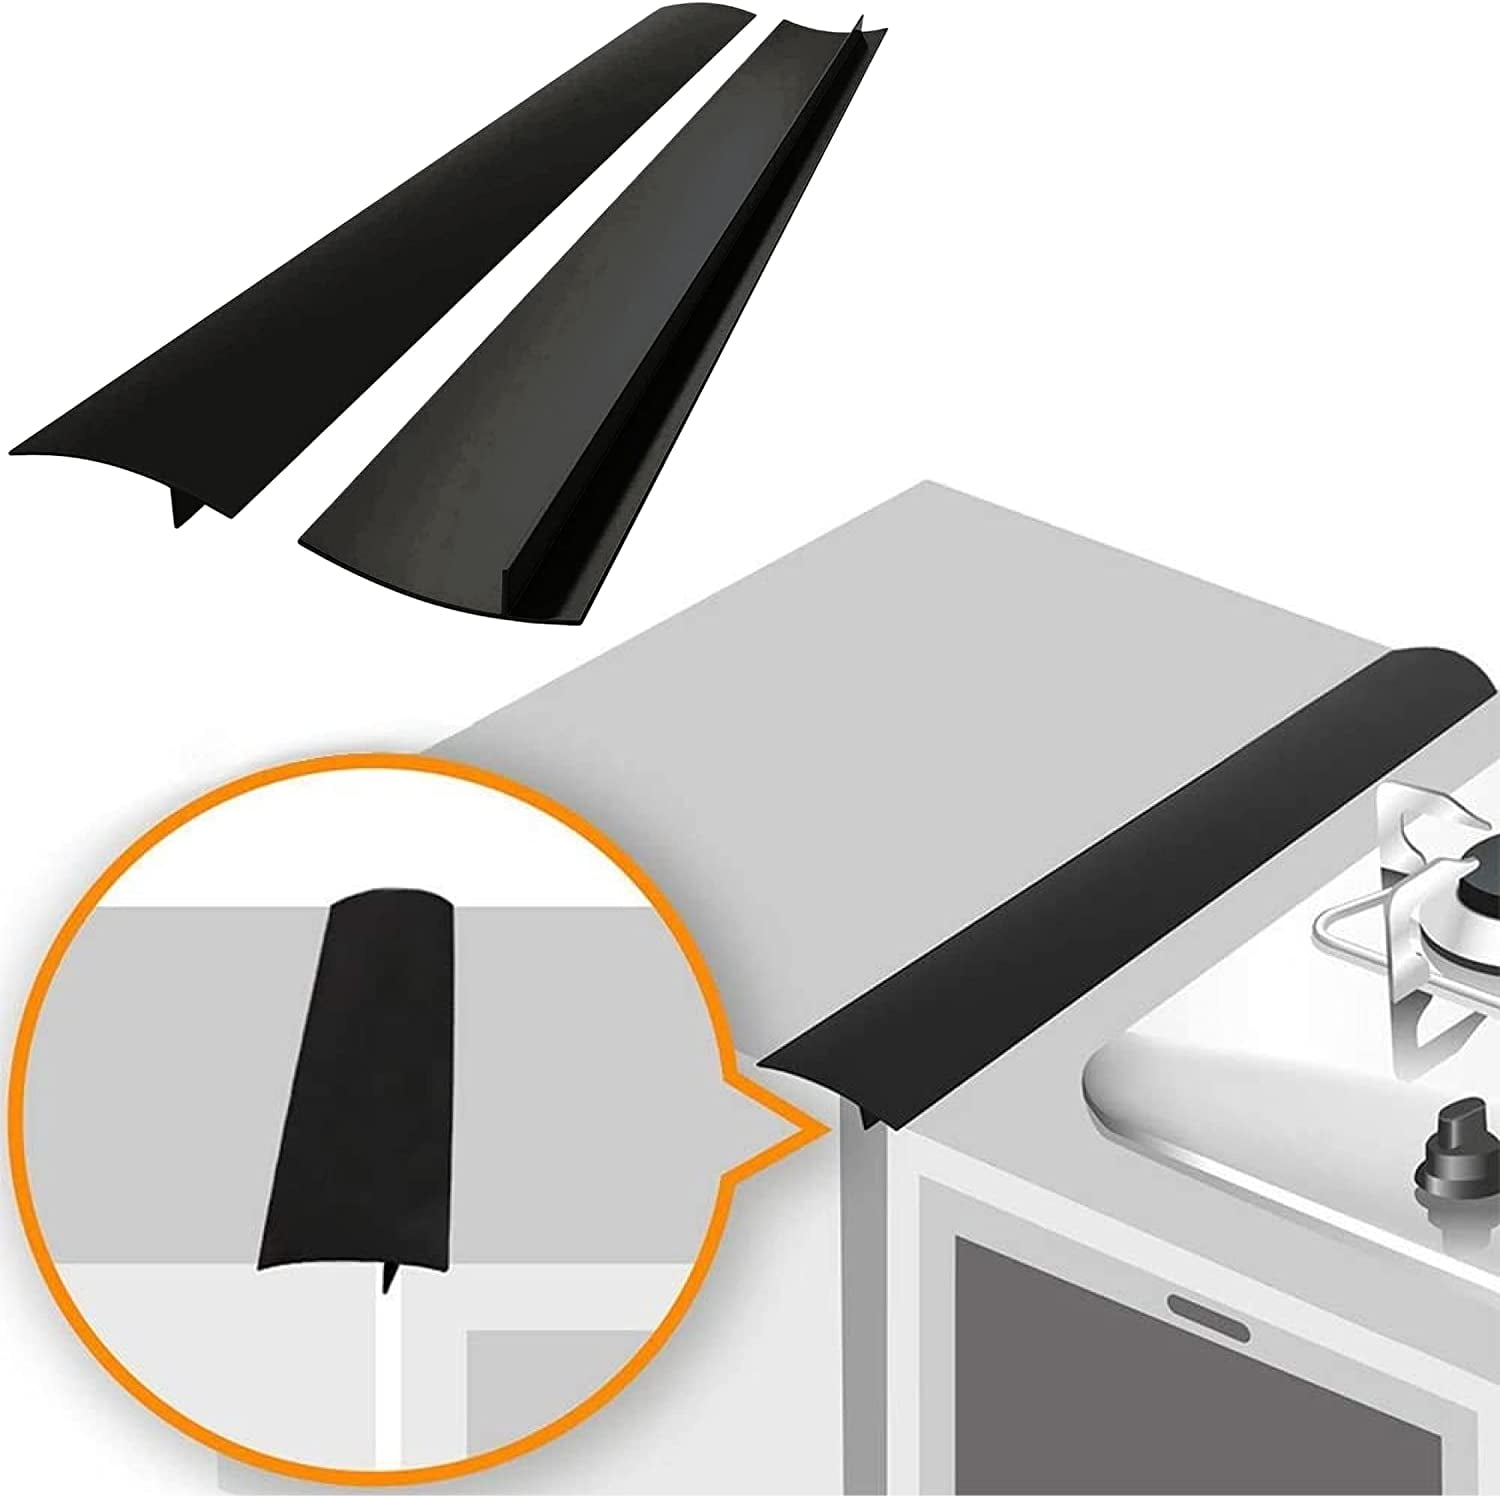 Nogis Silicone Stove Gap Covers, Heat Resistant Flexible Stovetop